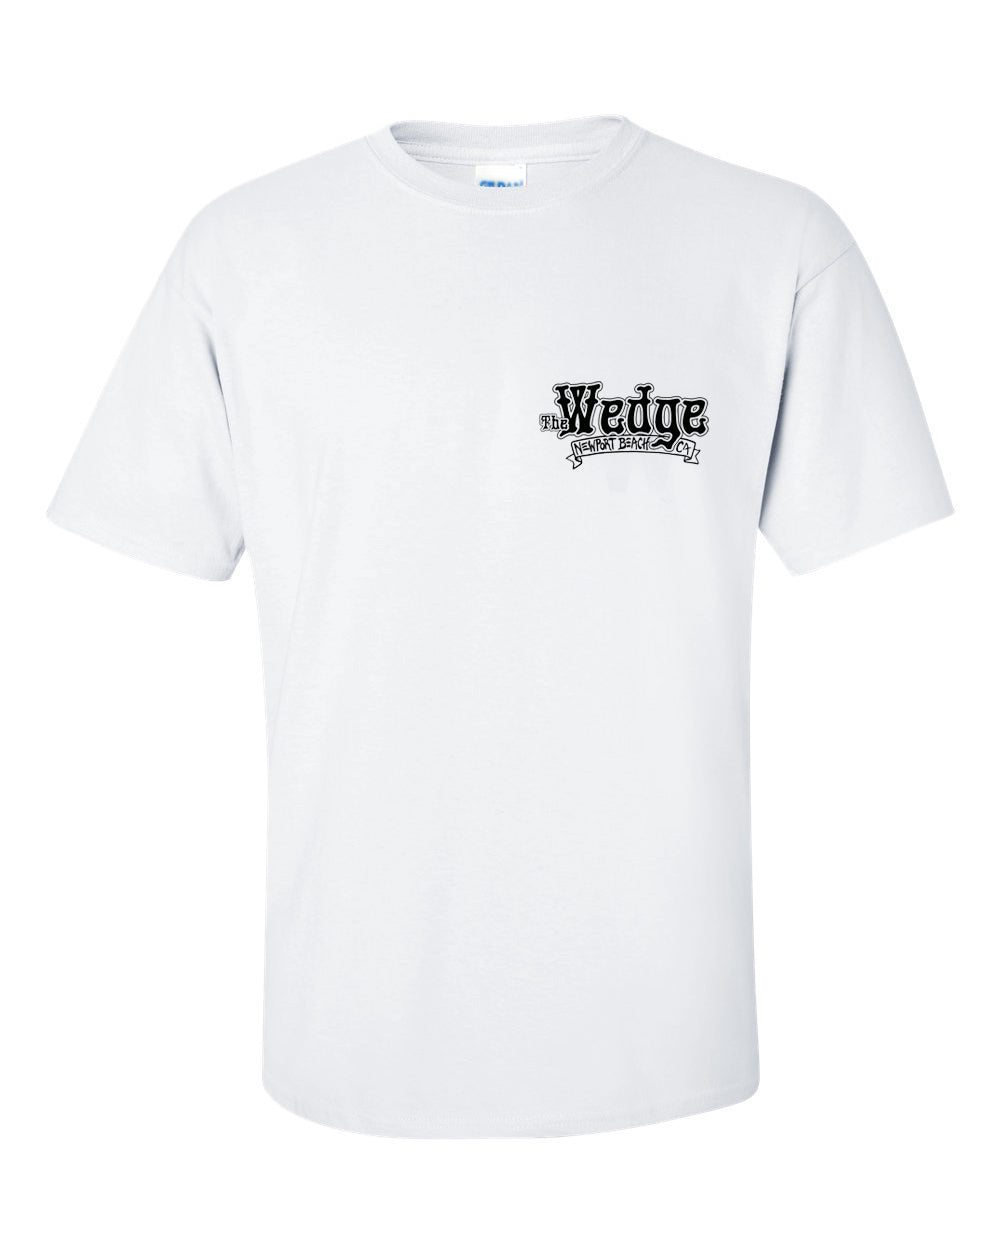 Wedge Griffin Short Sleeve Tee - White